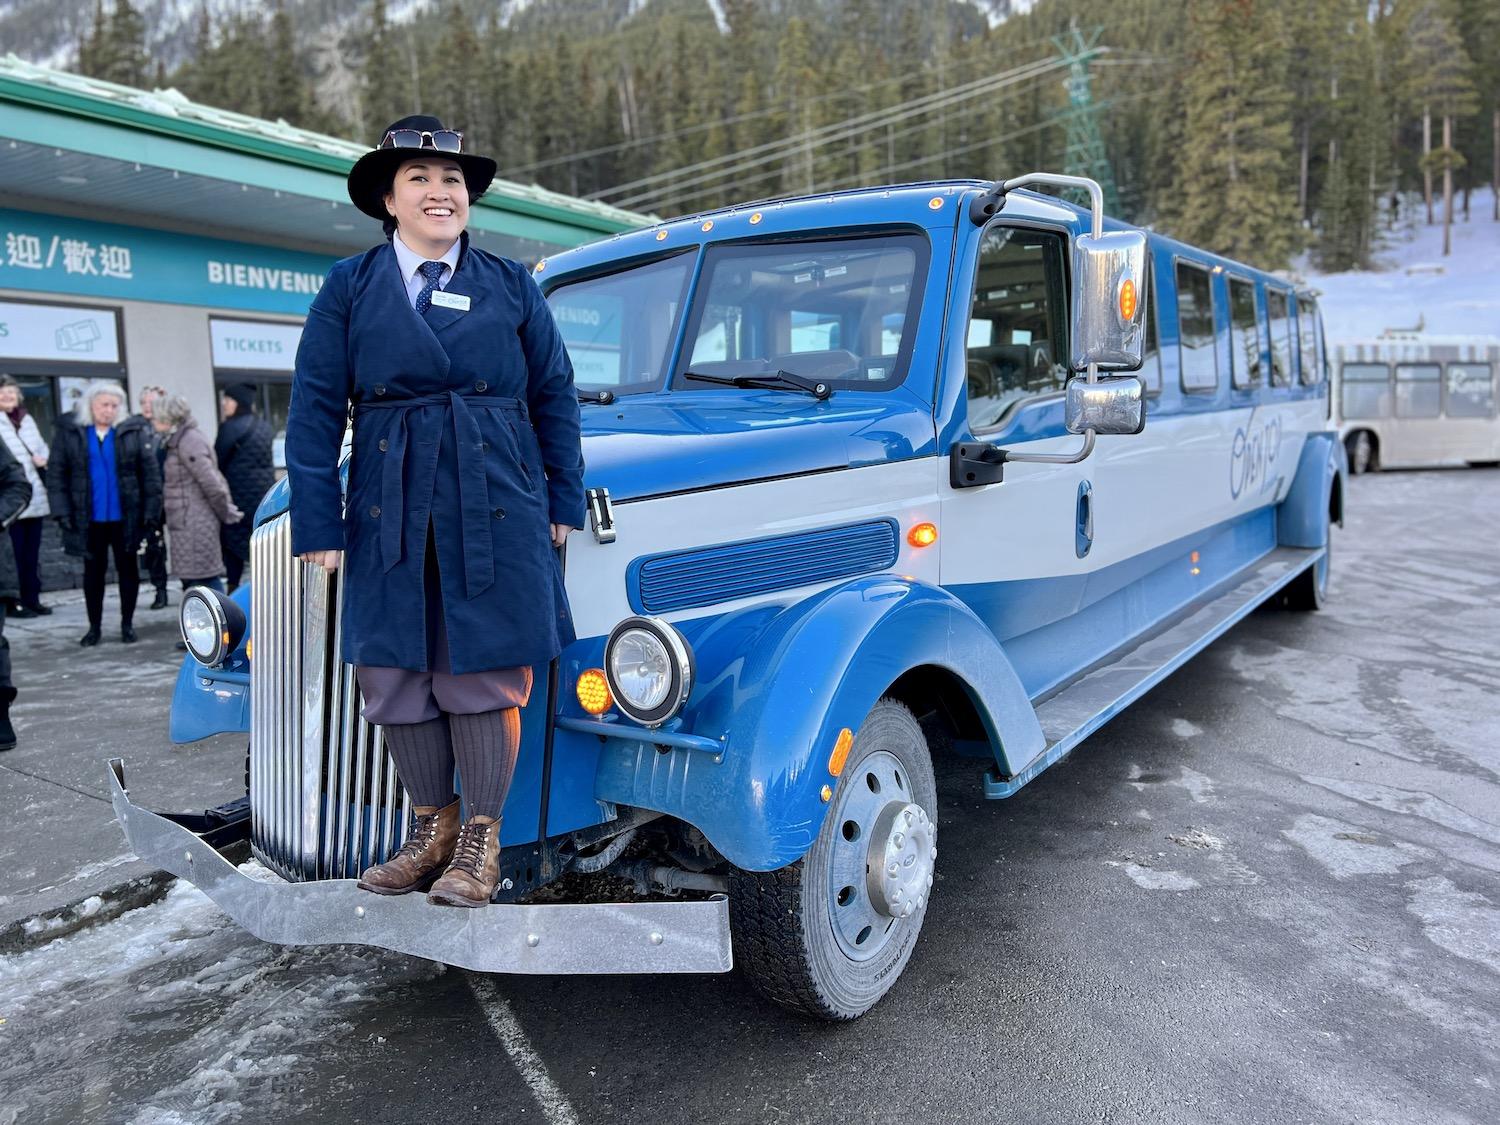 To get to the Banff Gondola, our conference group took an Open Top Touring vintage-inspired automobile driven by supervisor Aprille Walker.